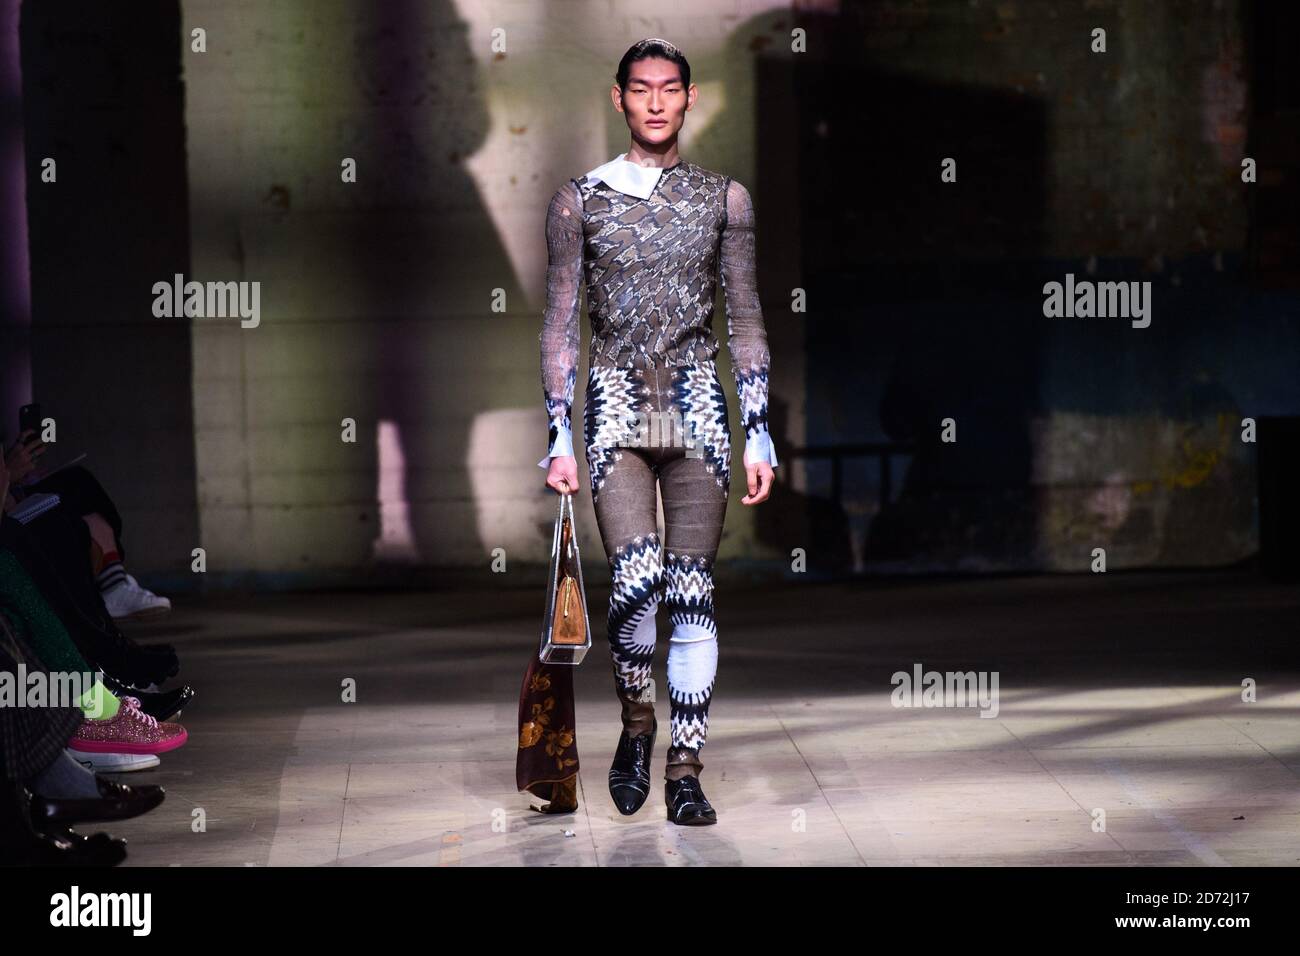 Models wear designs by Stefan Cooke on the catwalk during the MAN London Fashion Week Men's AW18 show, held at the Old Selfridge's Hotel, London. Picture date: Sunday January 7th, 2018. Photo credit should read: Matt Crossick/ EMPICS Entertainment. Stock Photo